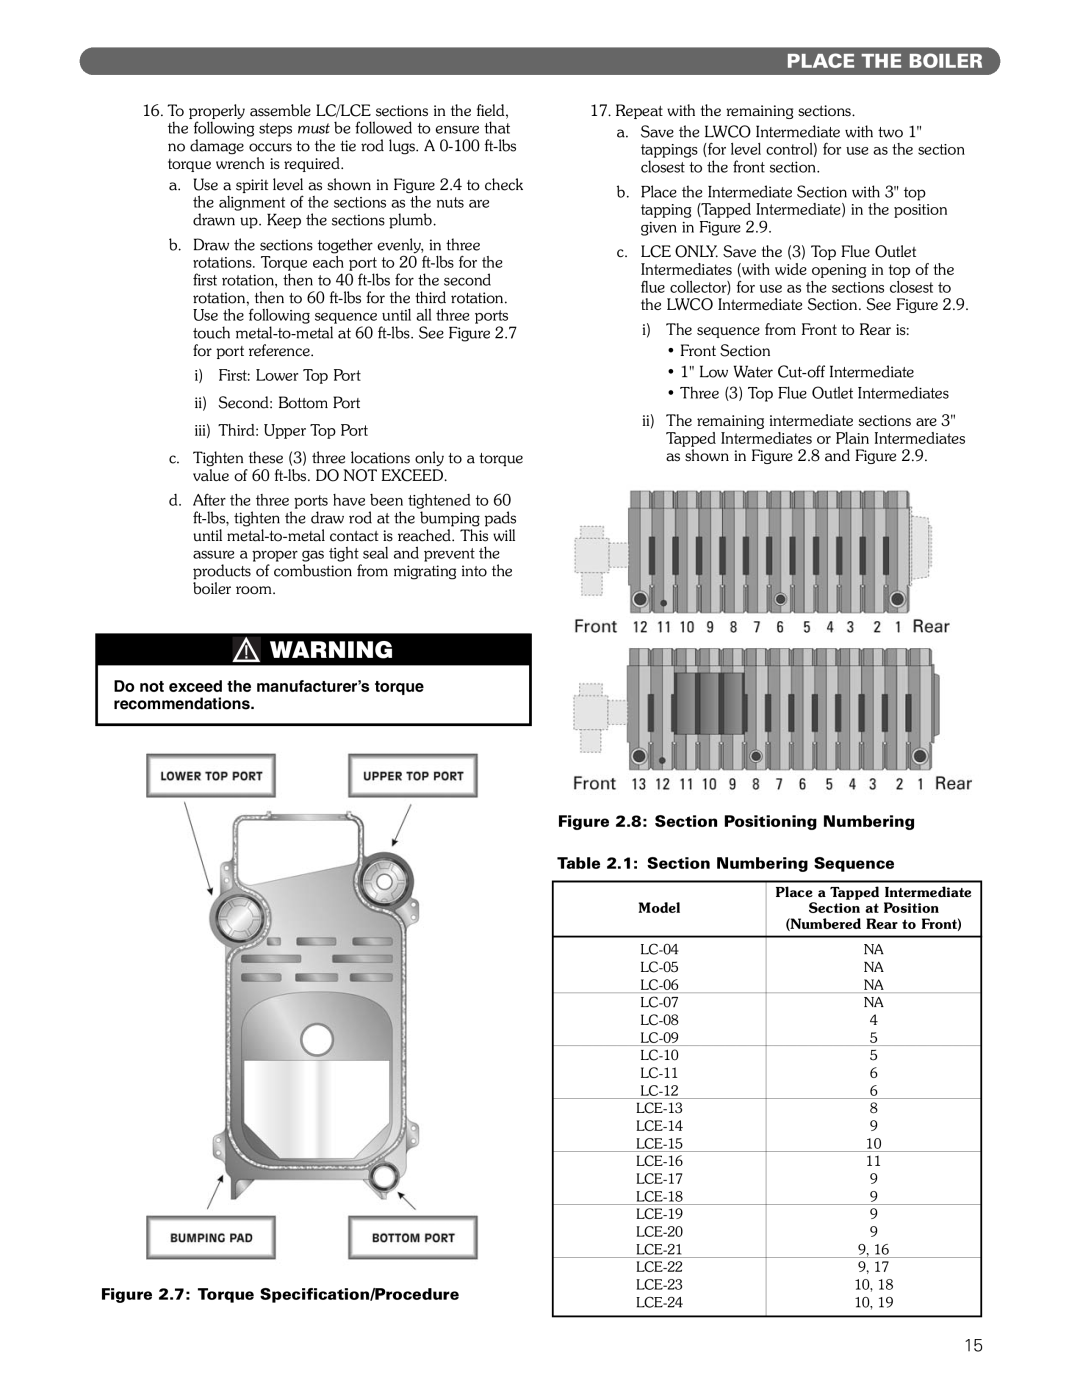 PB Heat Gas/Oil Boilers manual Place The Boiler, 7 Torque Specification/Procedure, 8 Section Positioning Numbering 